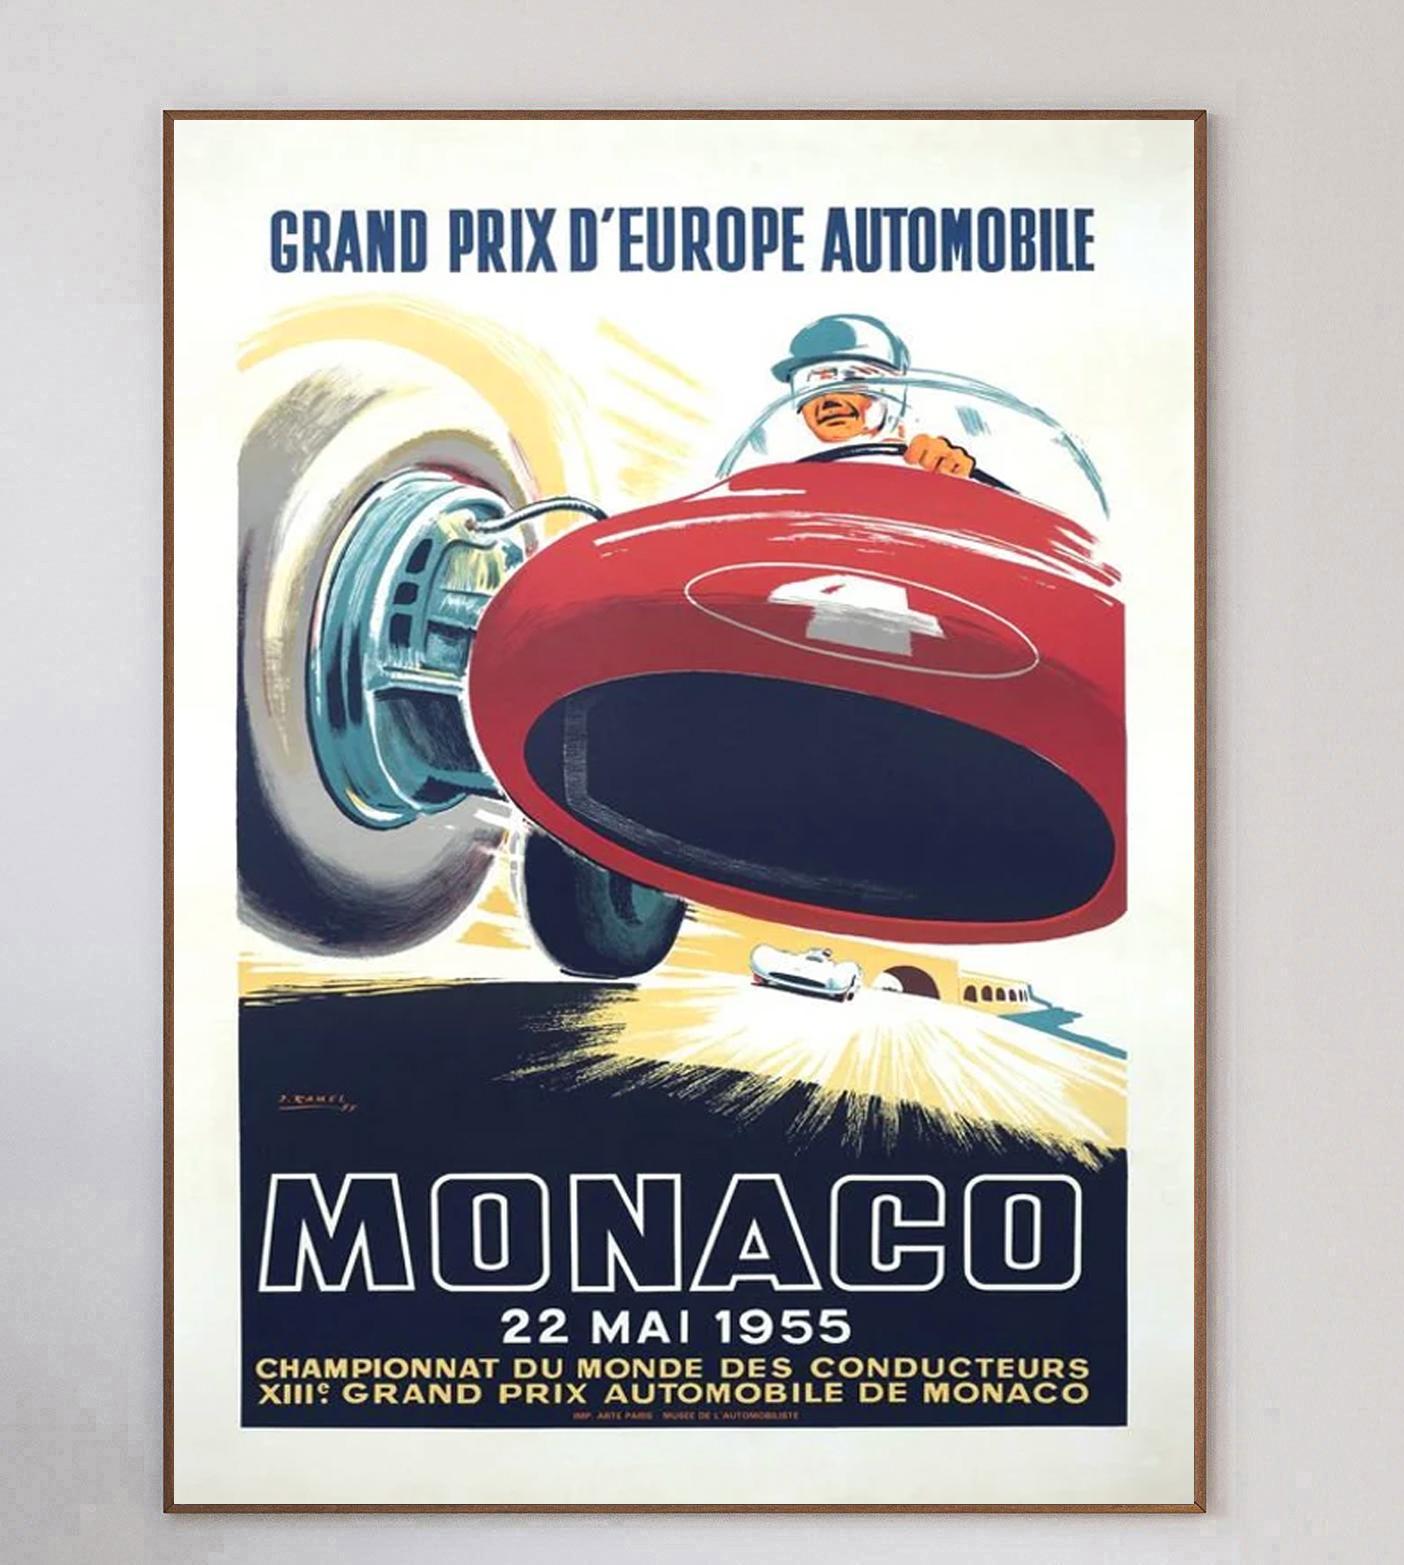 This poster is for the 1955 Monaco Grand Prix, with the brilliant illustration design by Jean Ramel. The image depicts a racing Ferrari, the previous years winner, and also the winner of the 1955 event.

This stunning art deco masterpiece is an